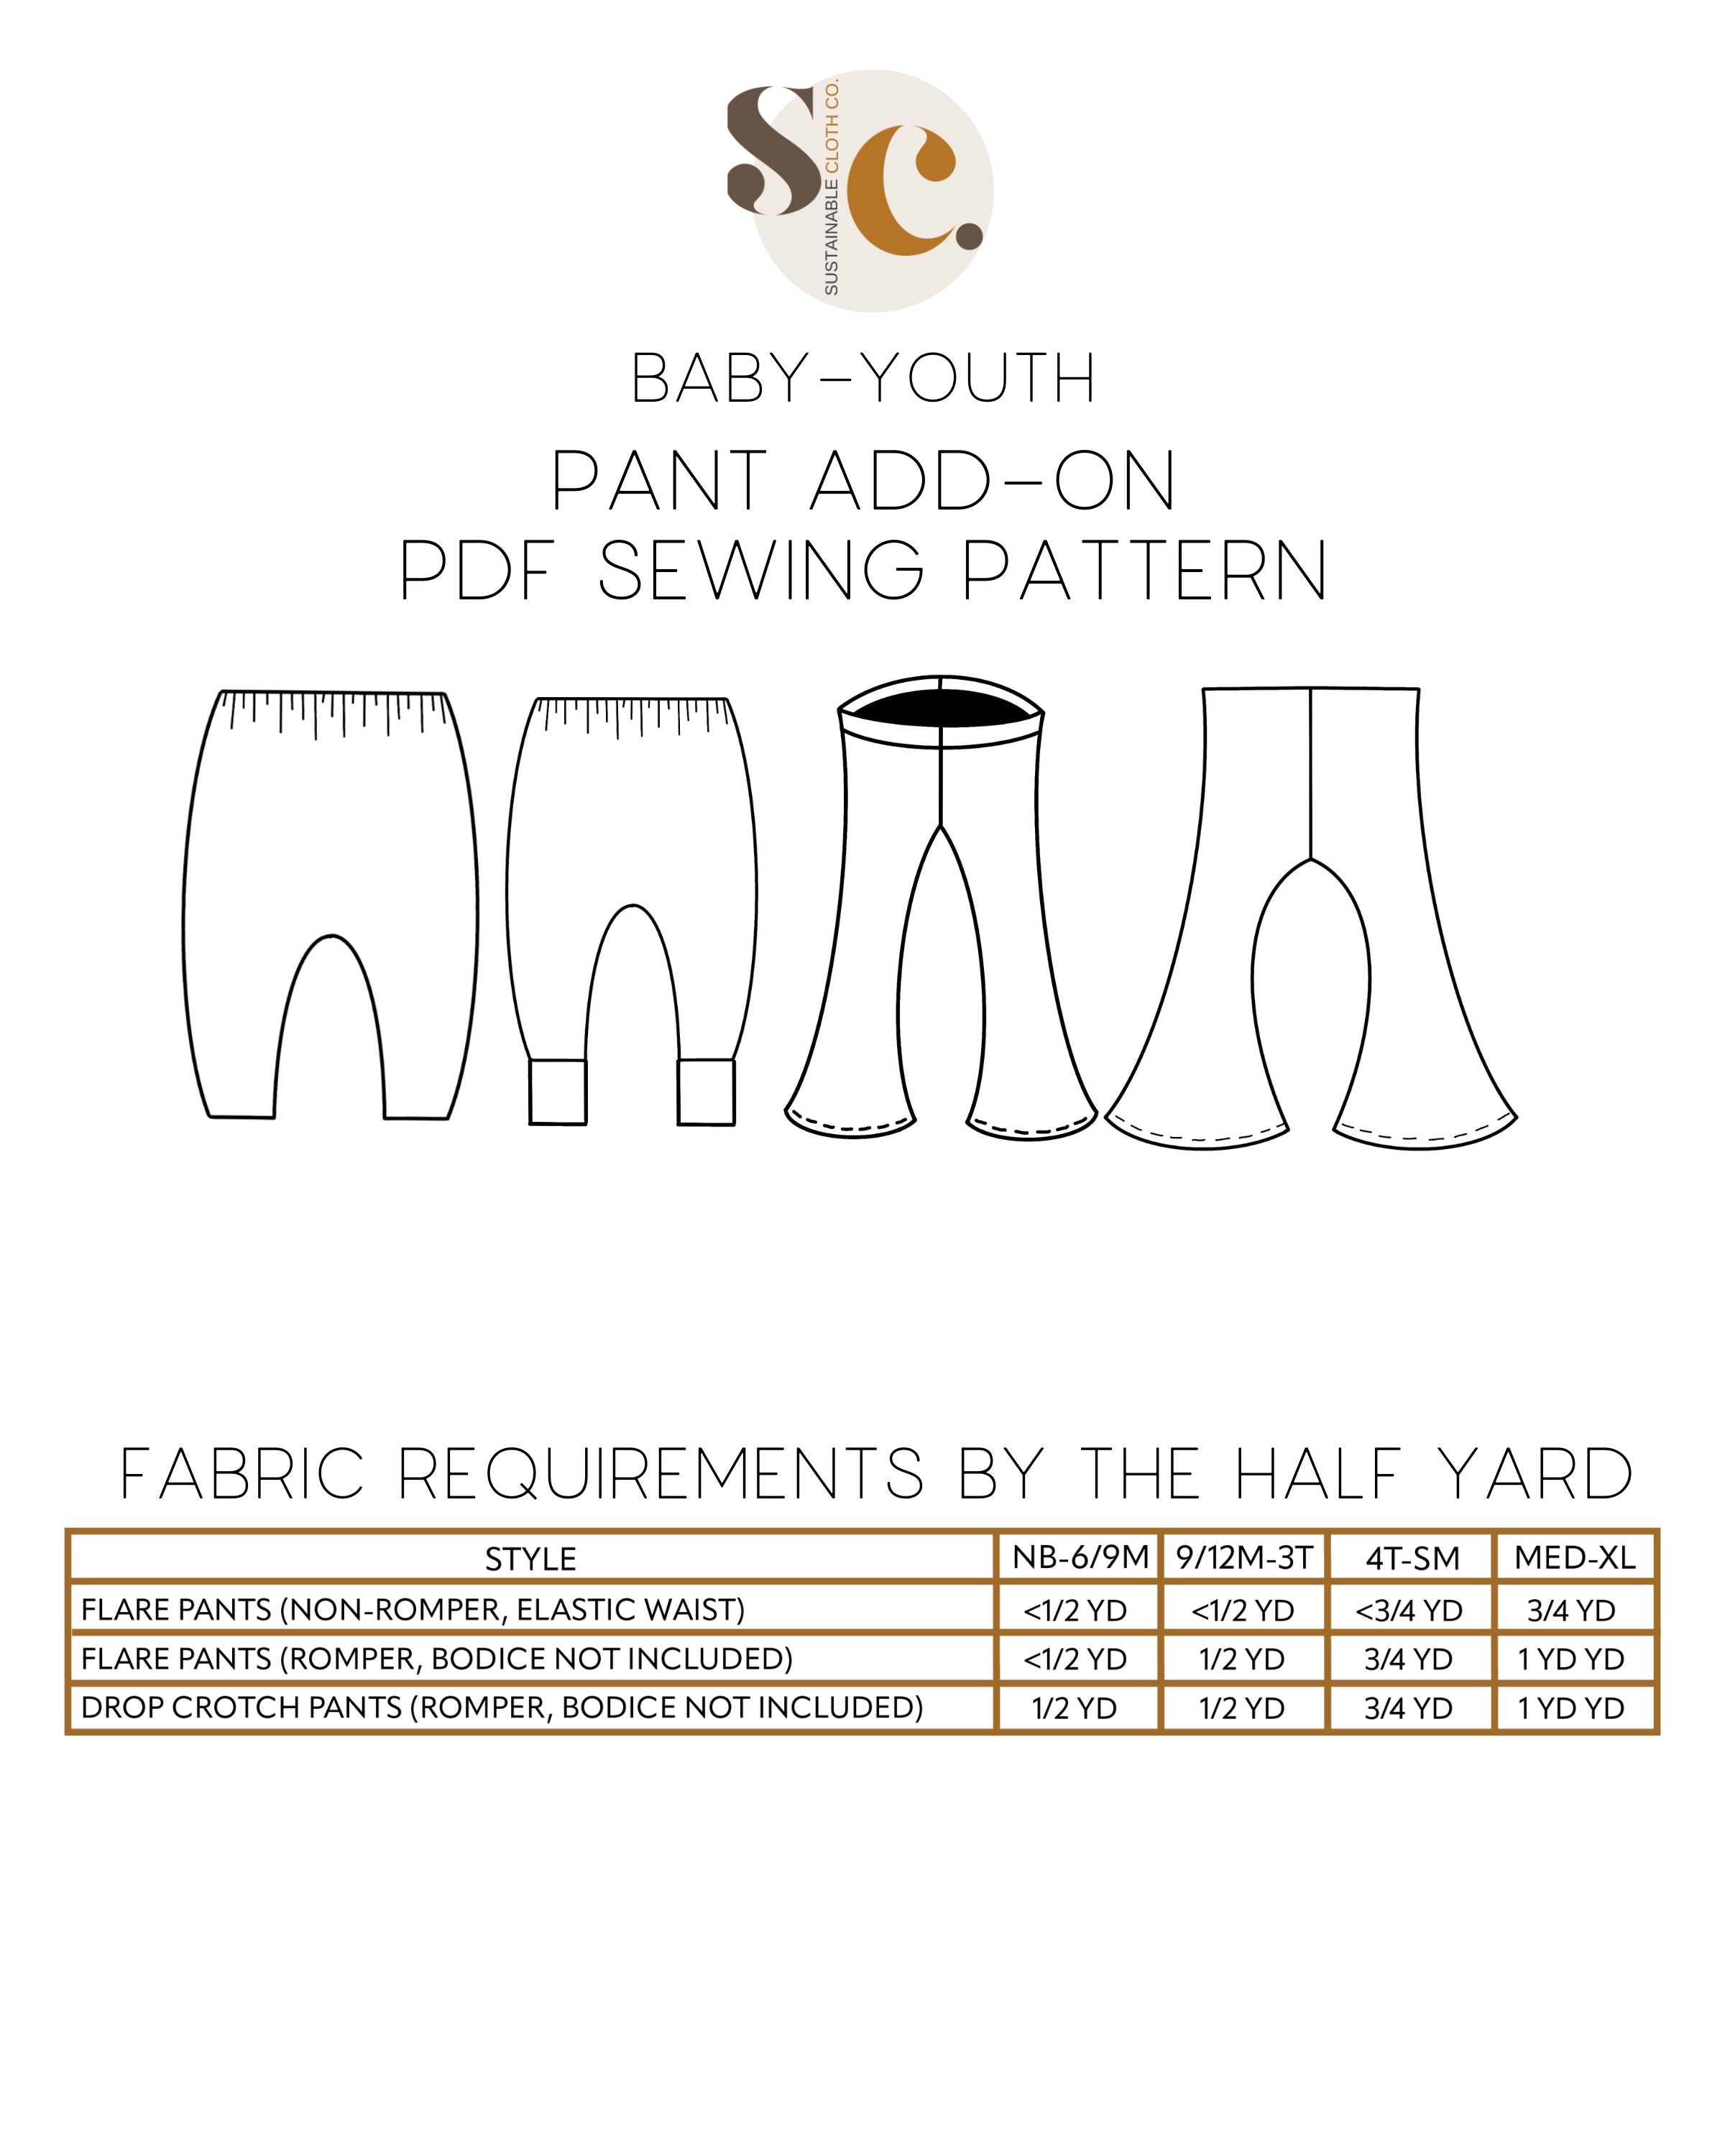 How to sew baby harem pants - Gathered